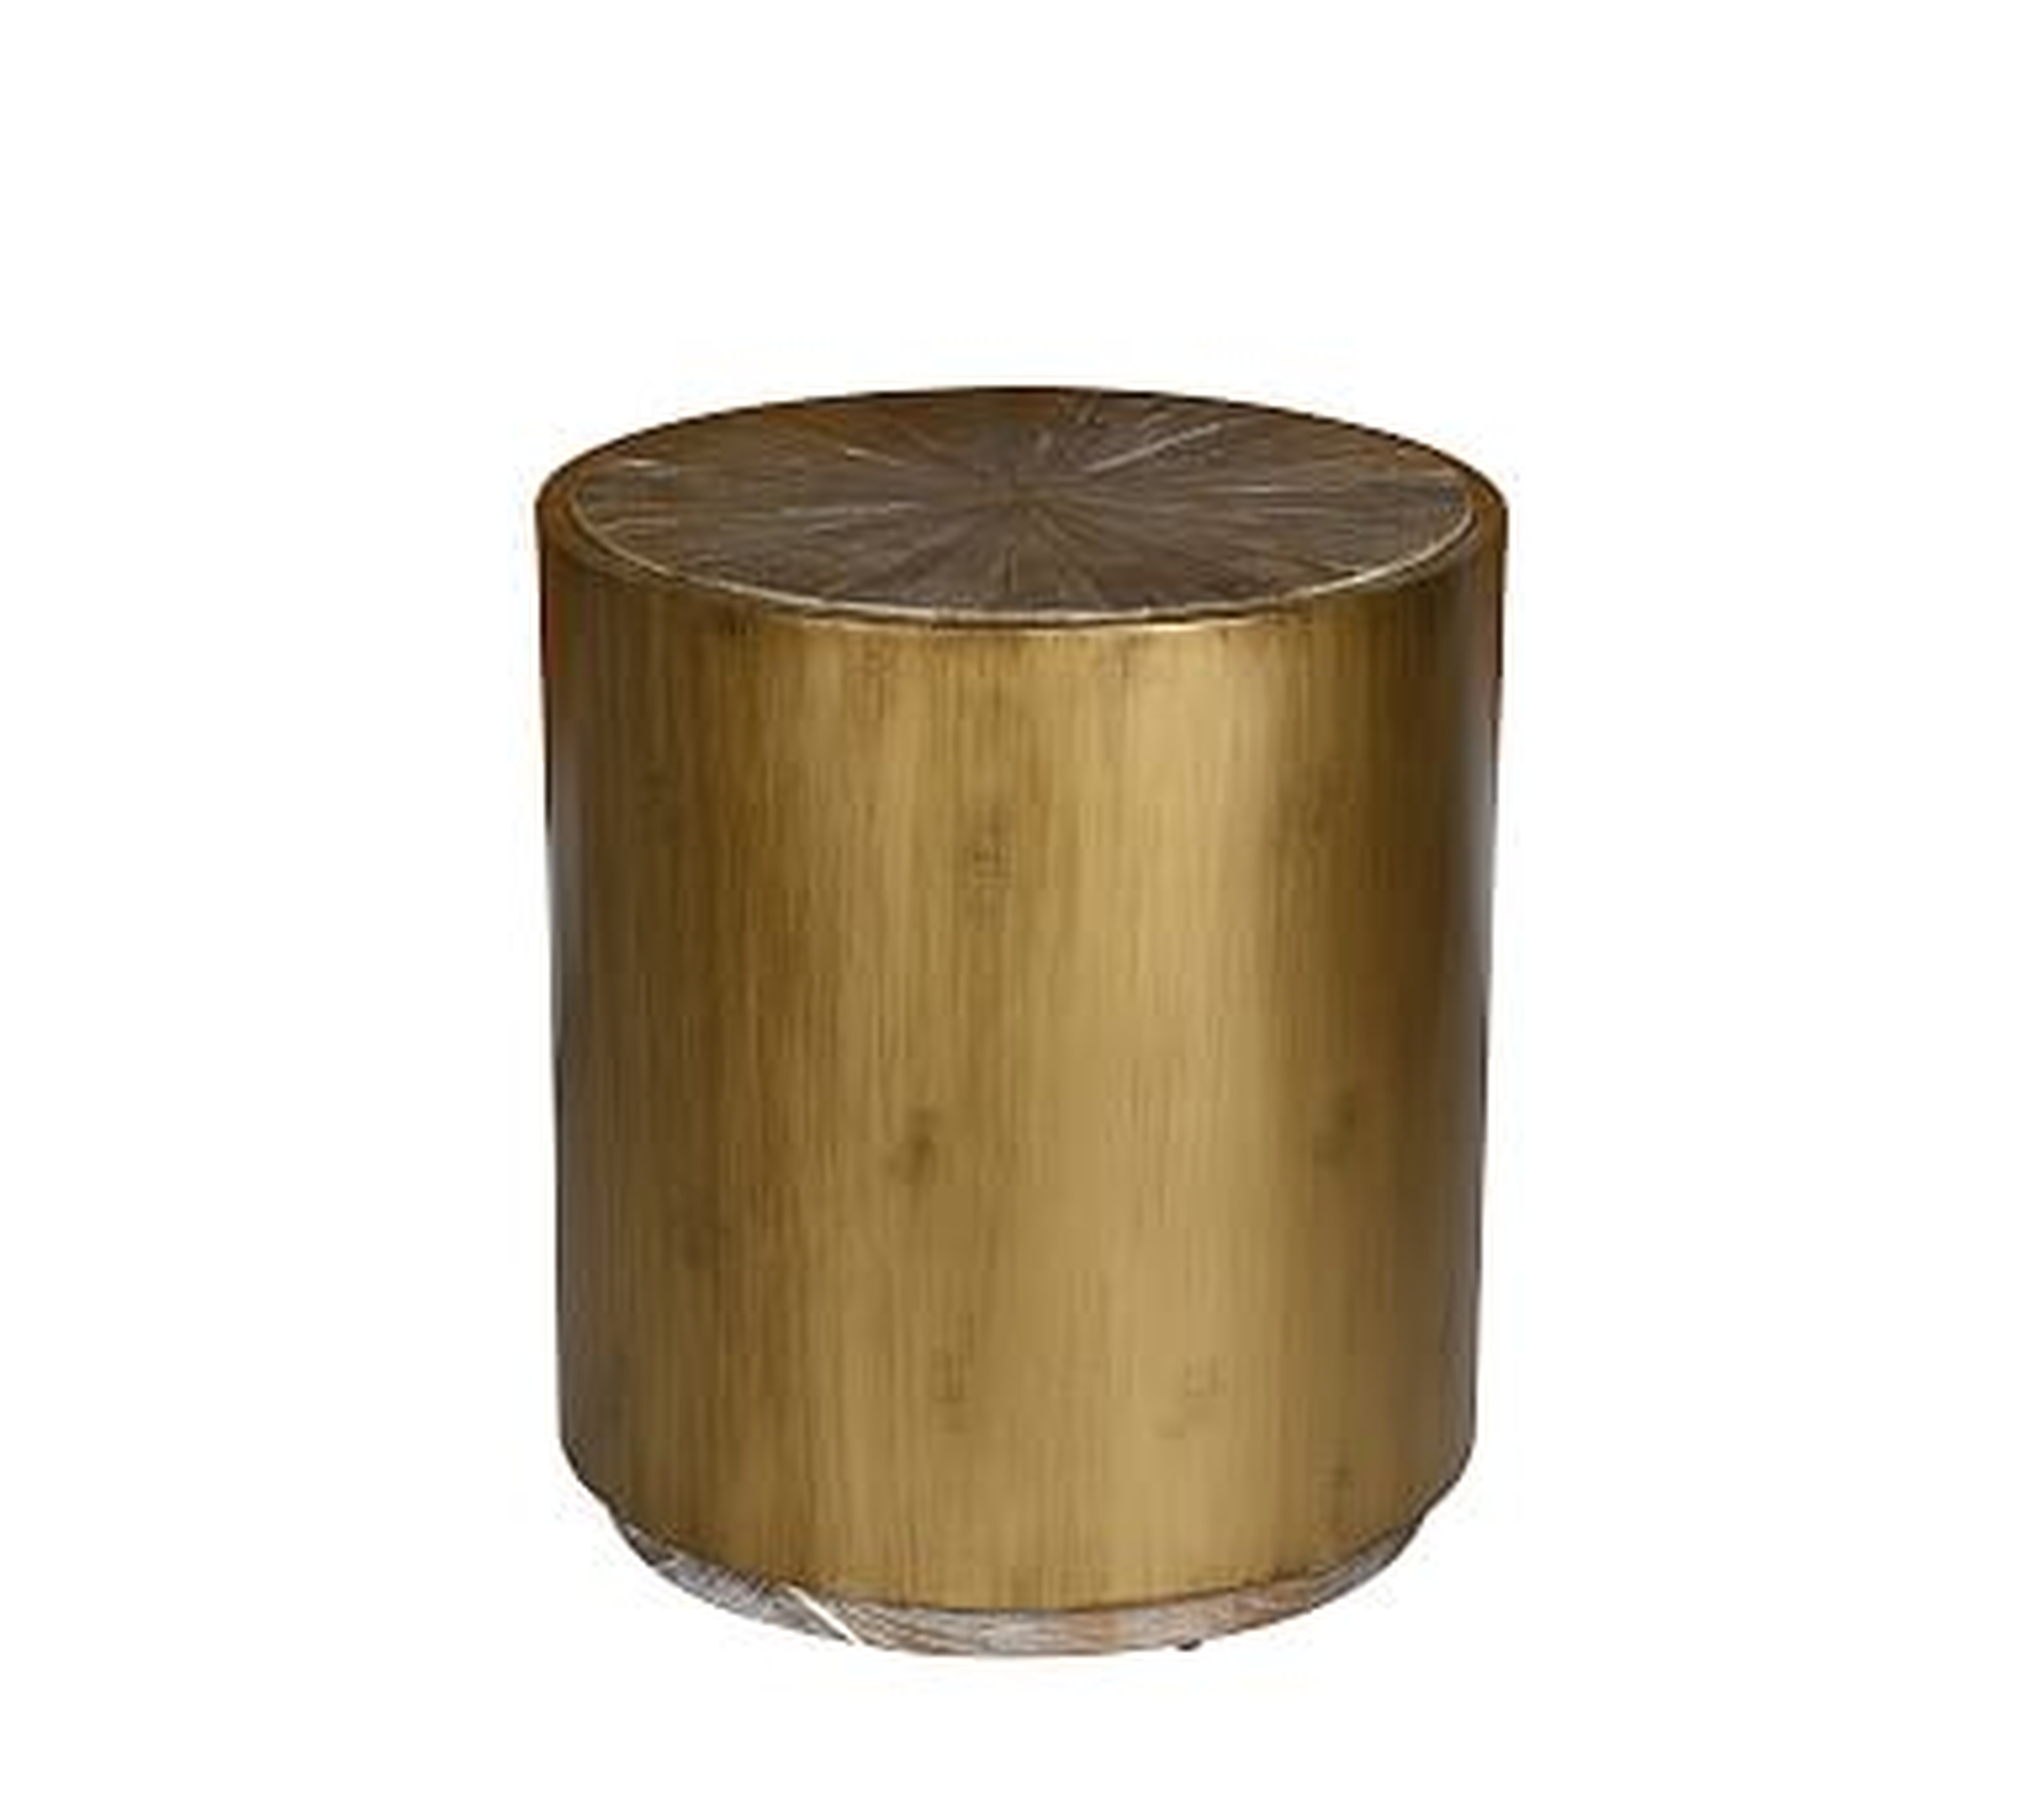 Brockton Metal Wrapped Reclaimed Wood End Table, Antique Gold - Pottery Barn